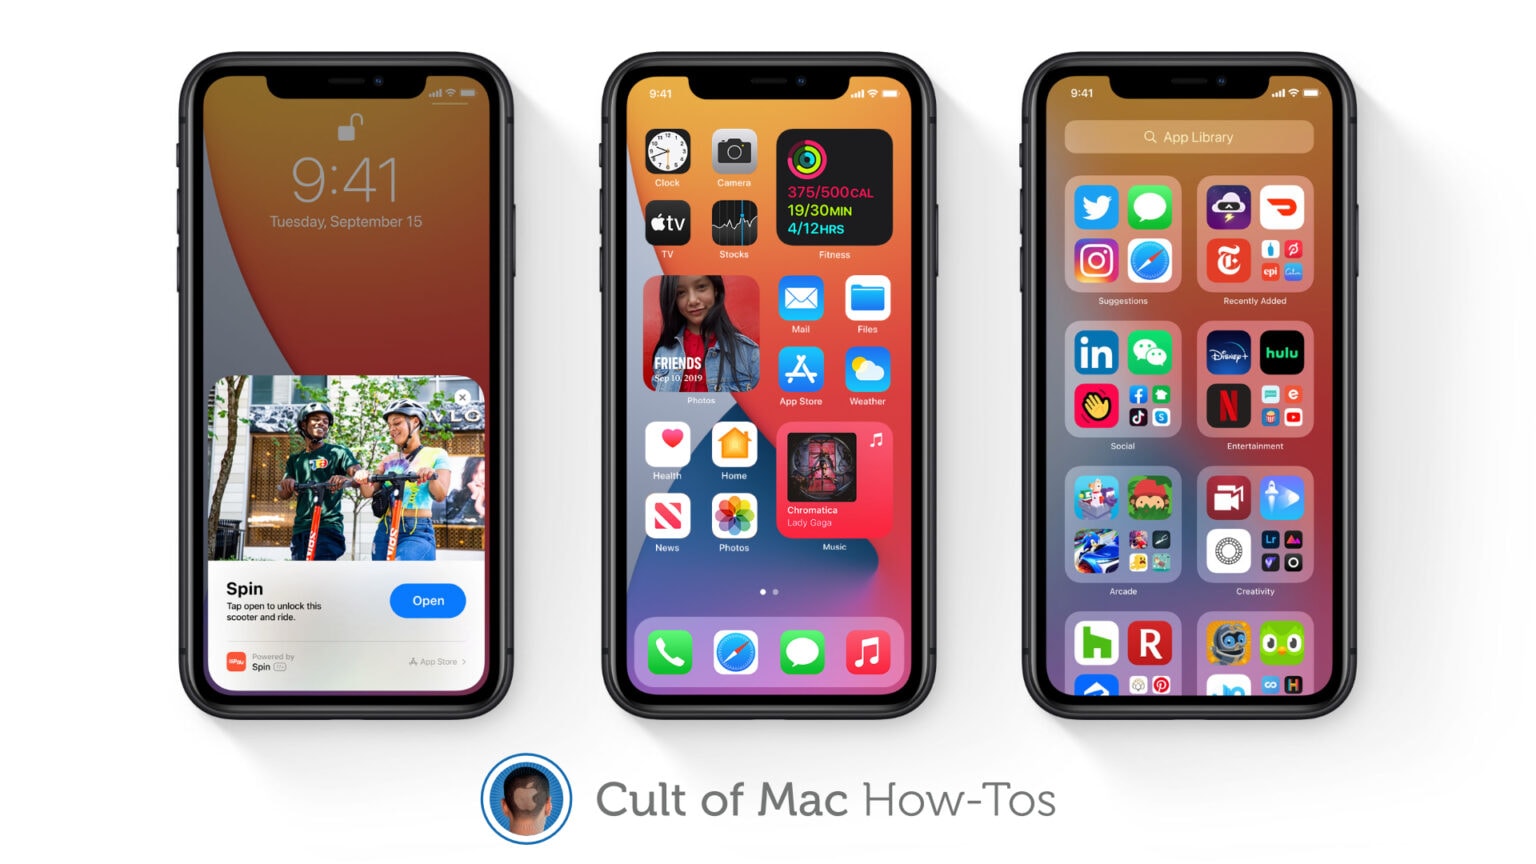 How to use the best features in iOS 14